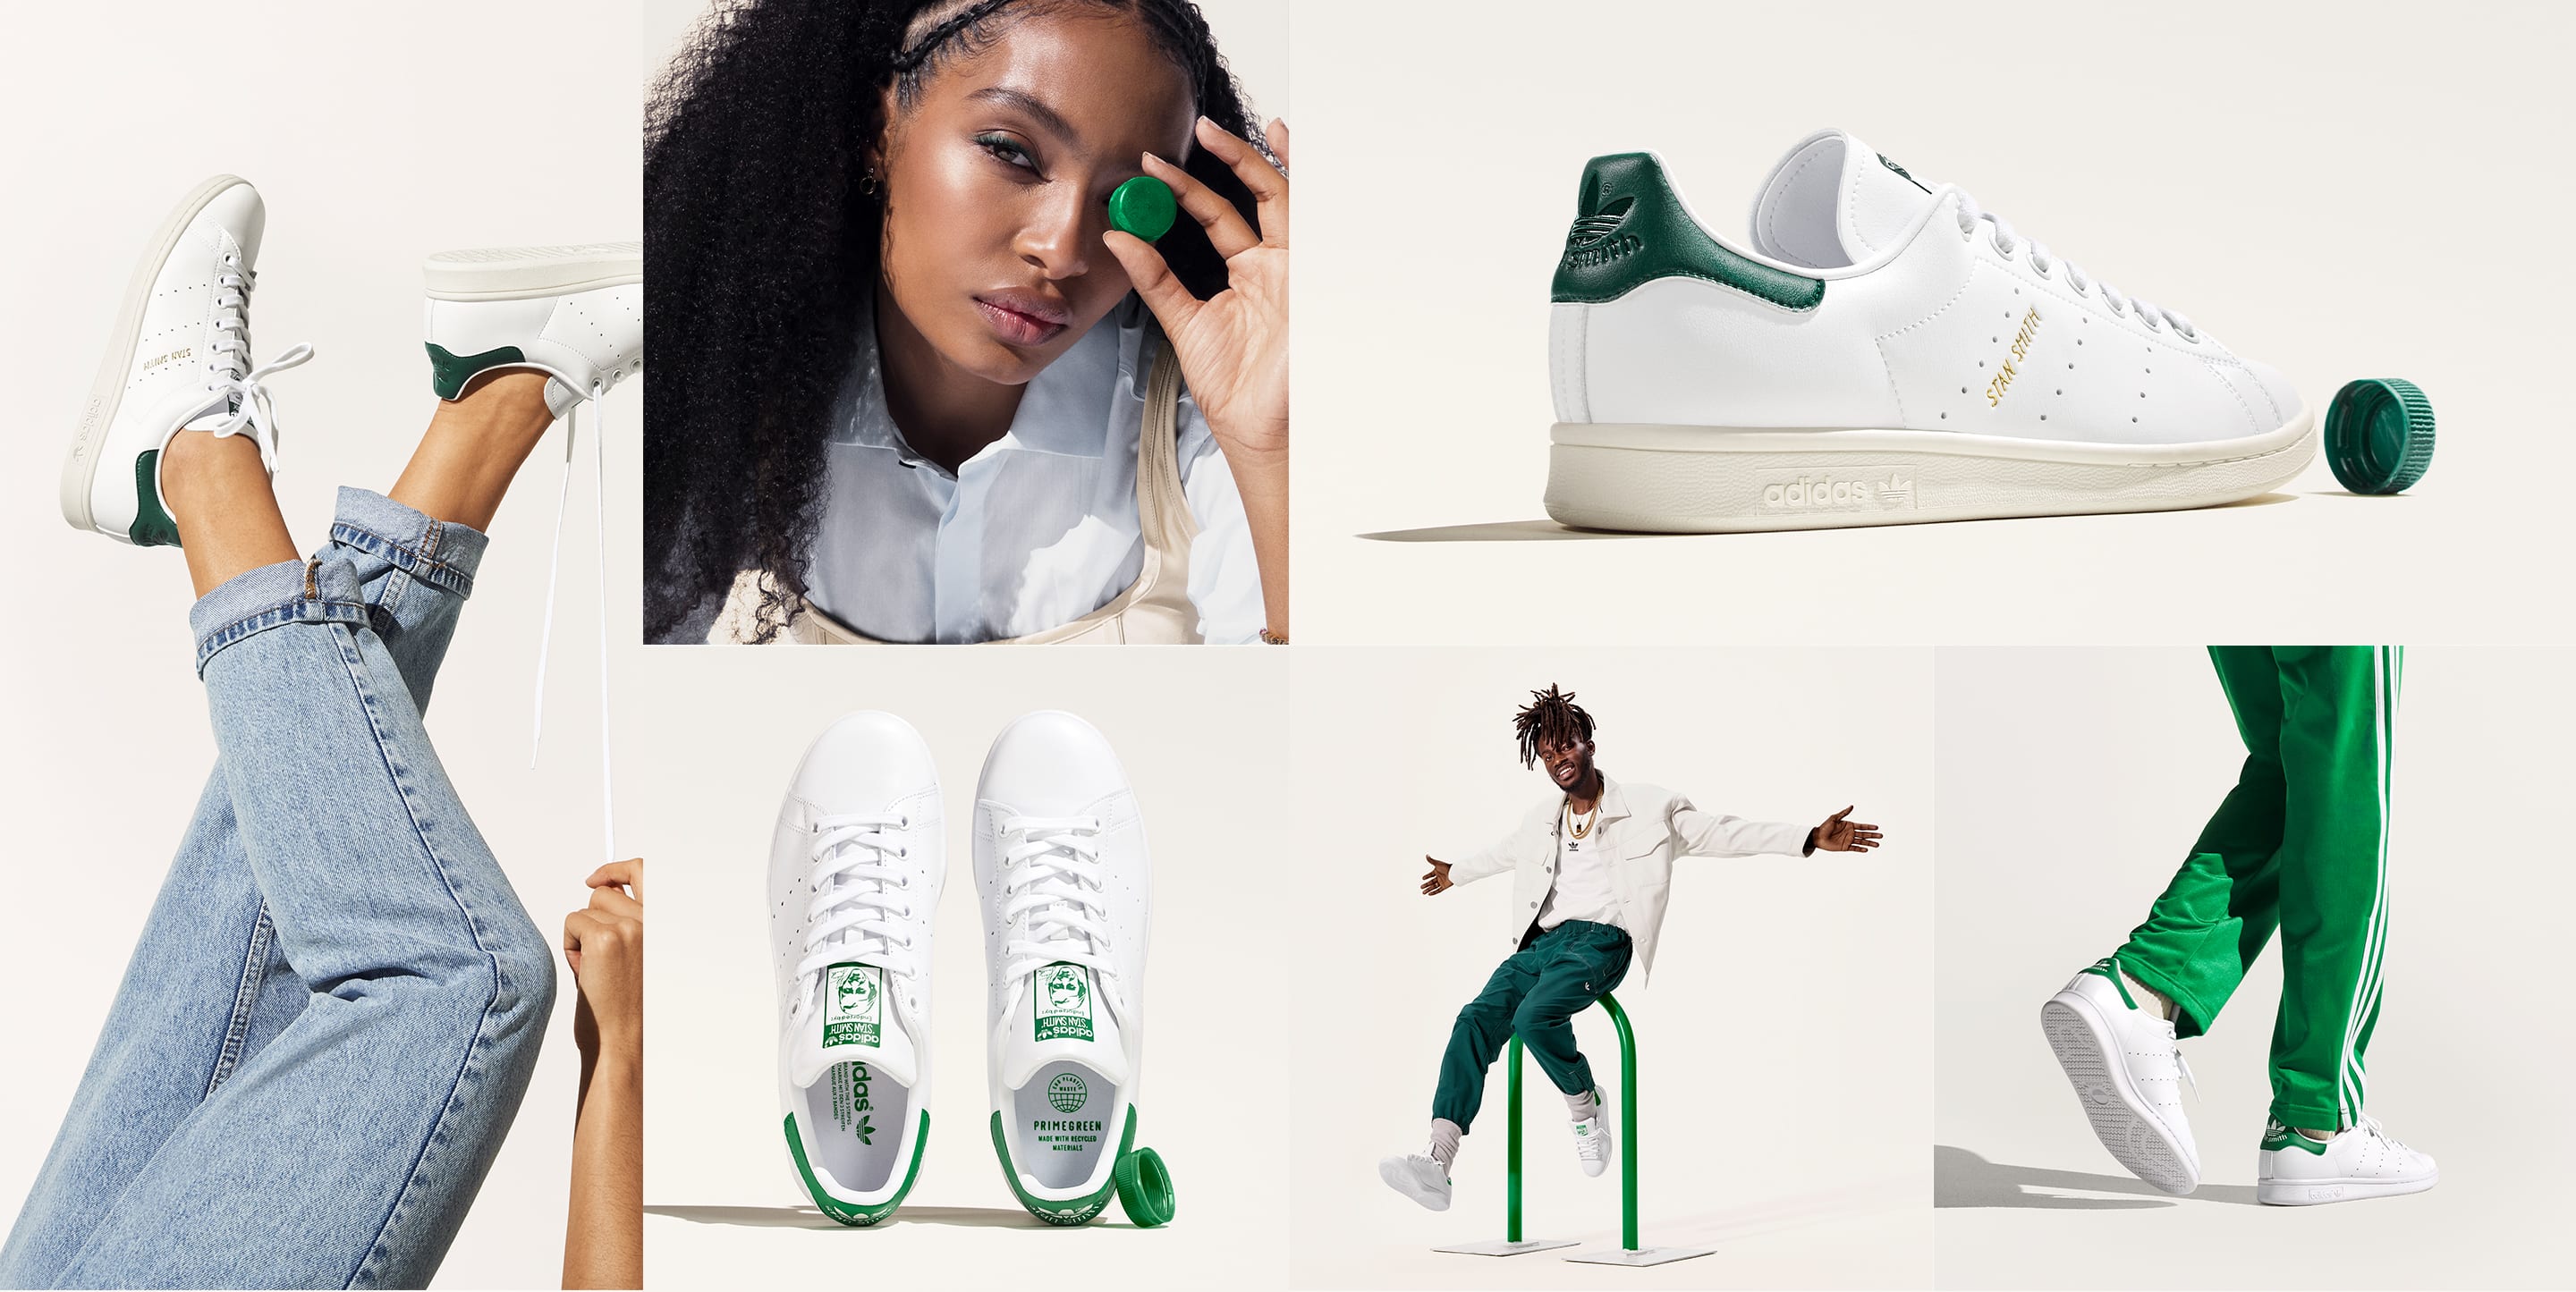 womens stan smith shoes outfit